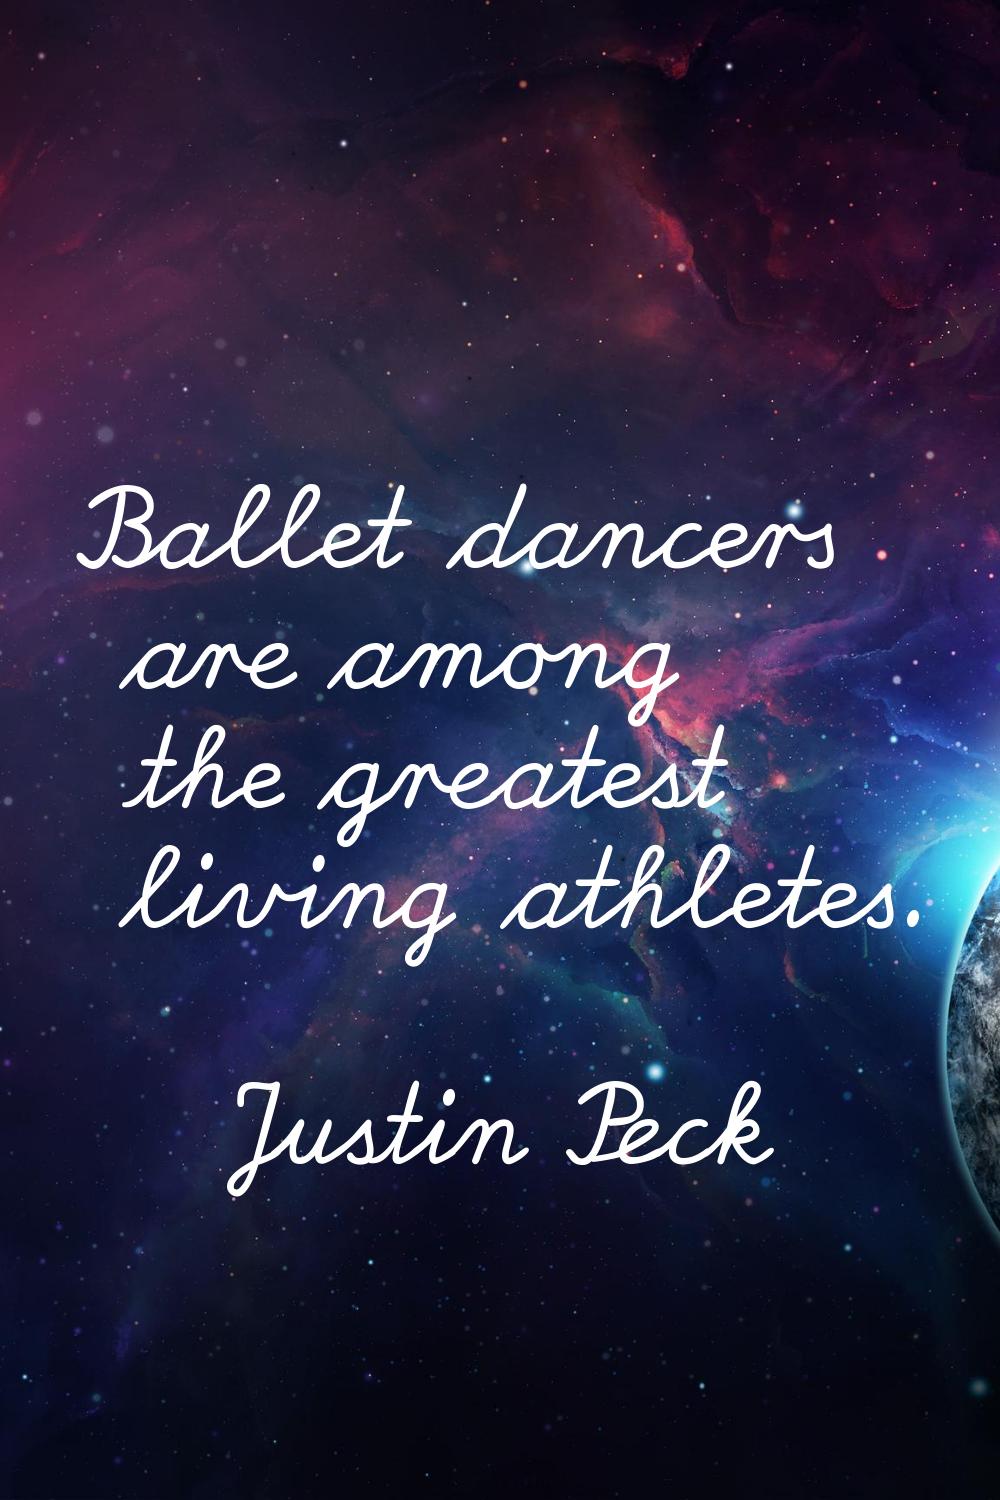 Ballet dancers are among the greatest living athletes.